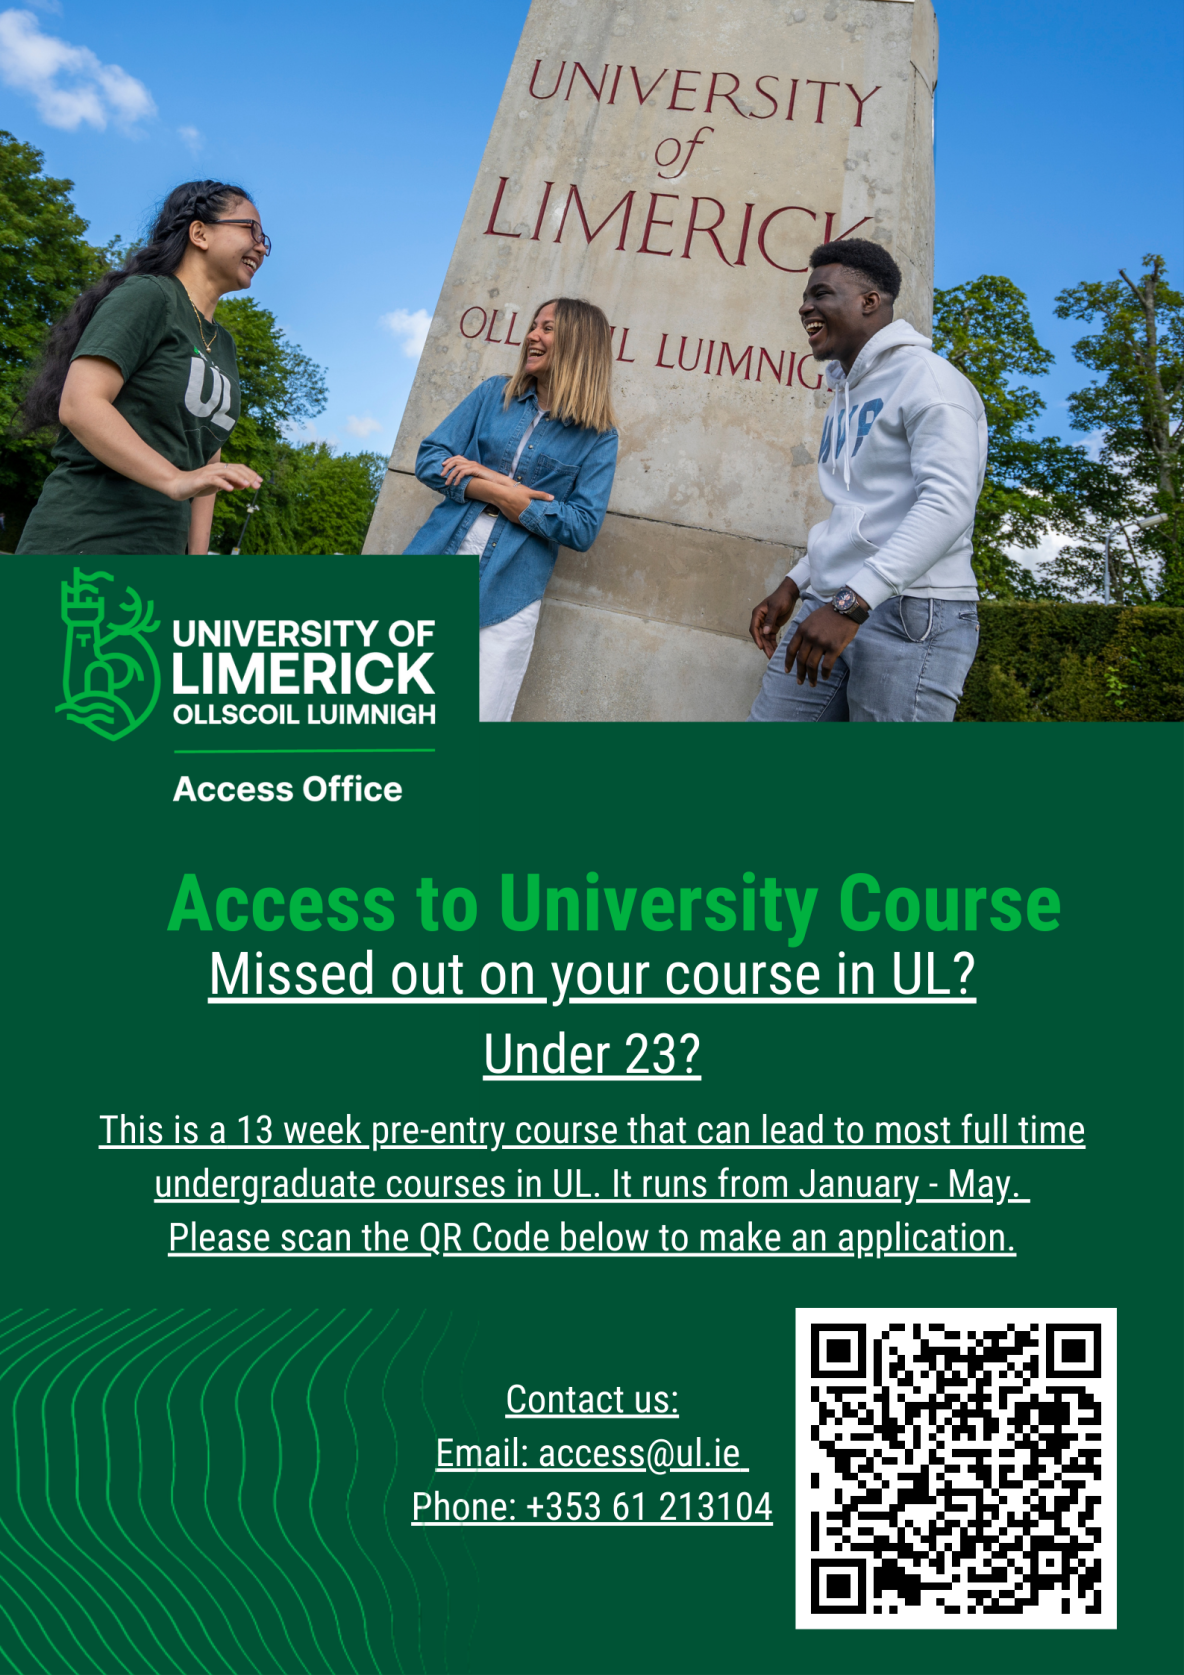 Promotional Flyer for Access to University course with QR Code